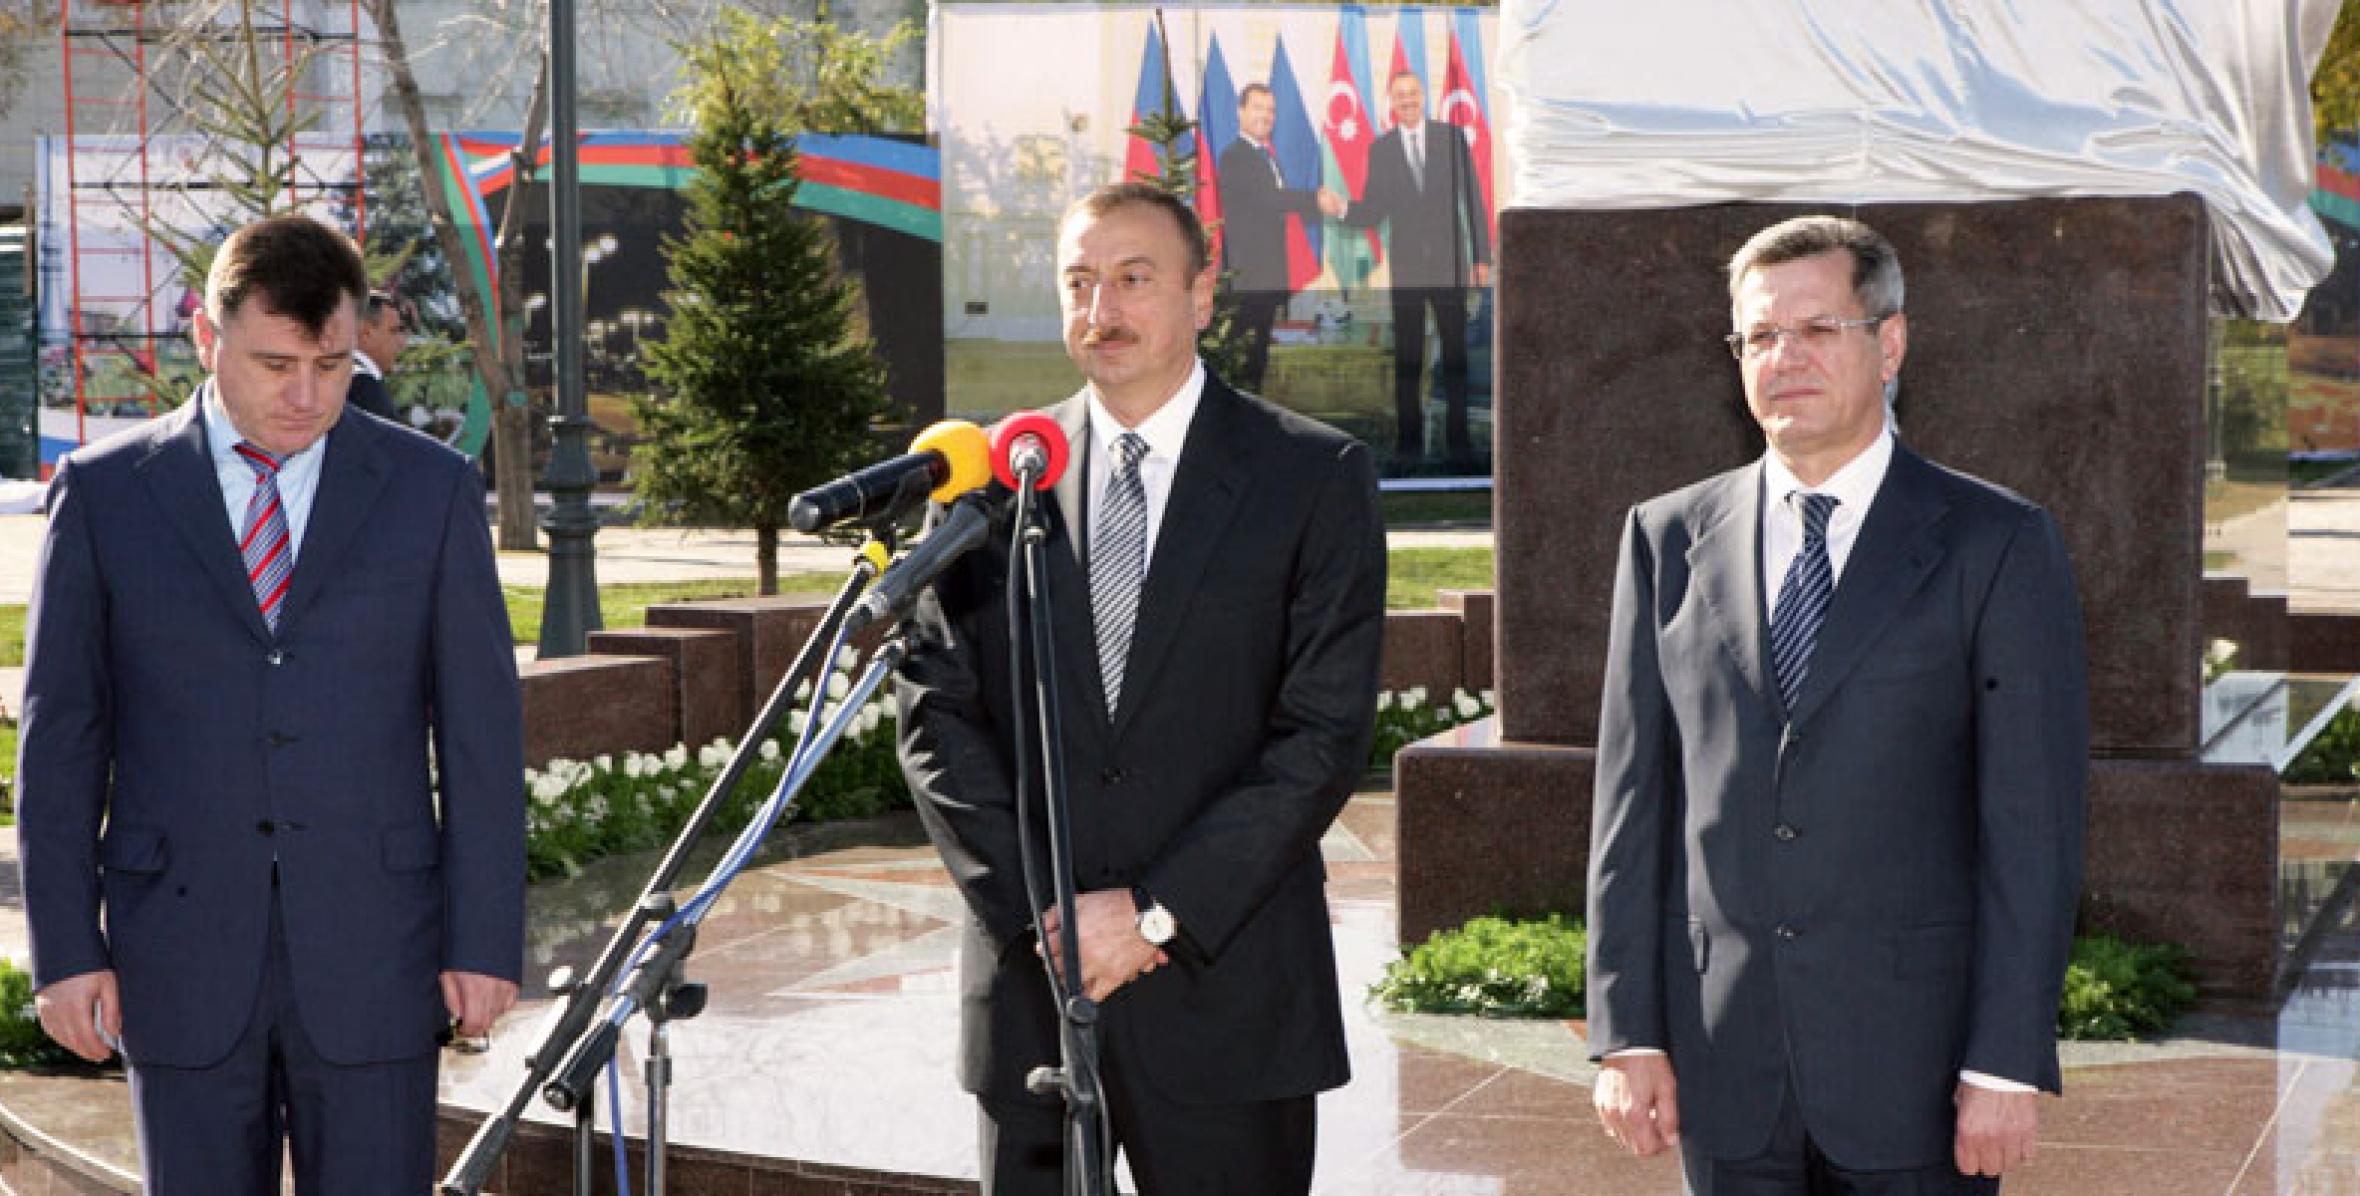 Ilham Aliyev participated at the opening ceremony of the monument of Heydar Aliyev in Astrakhan city